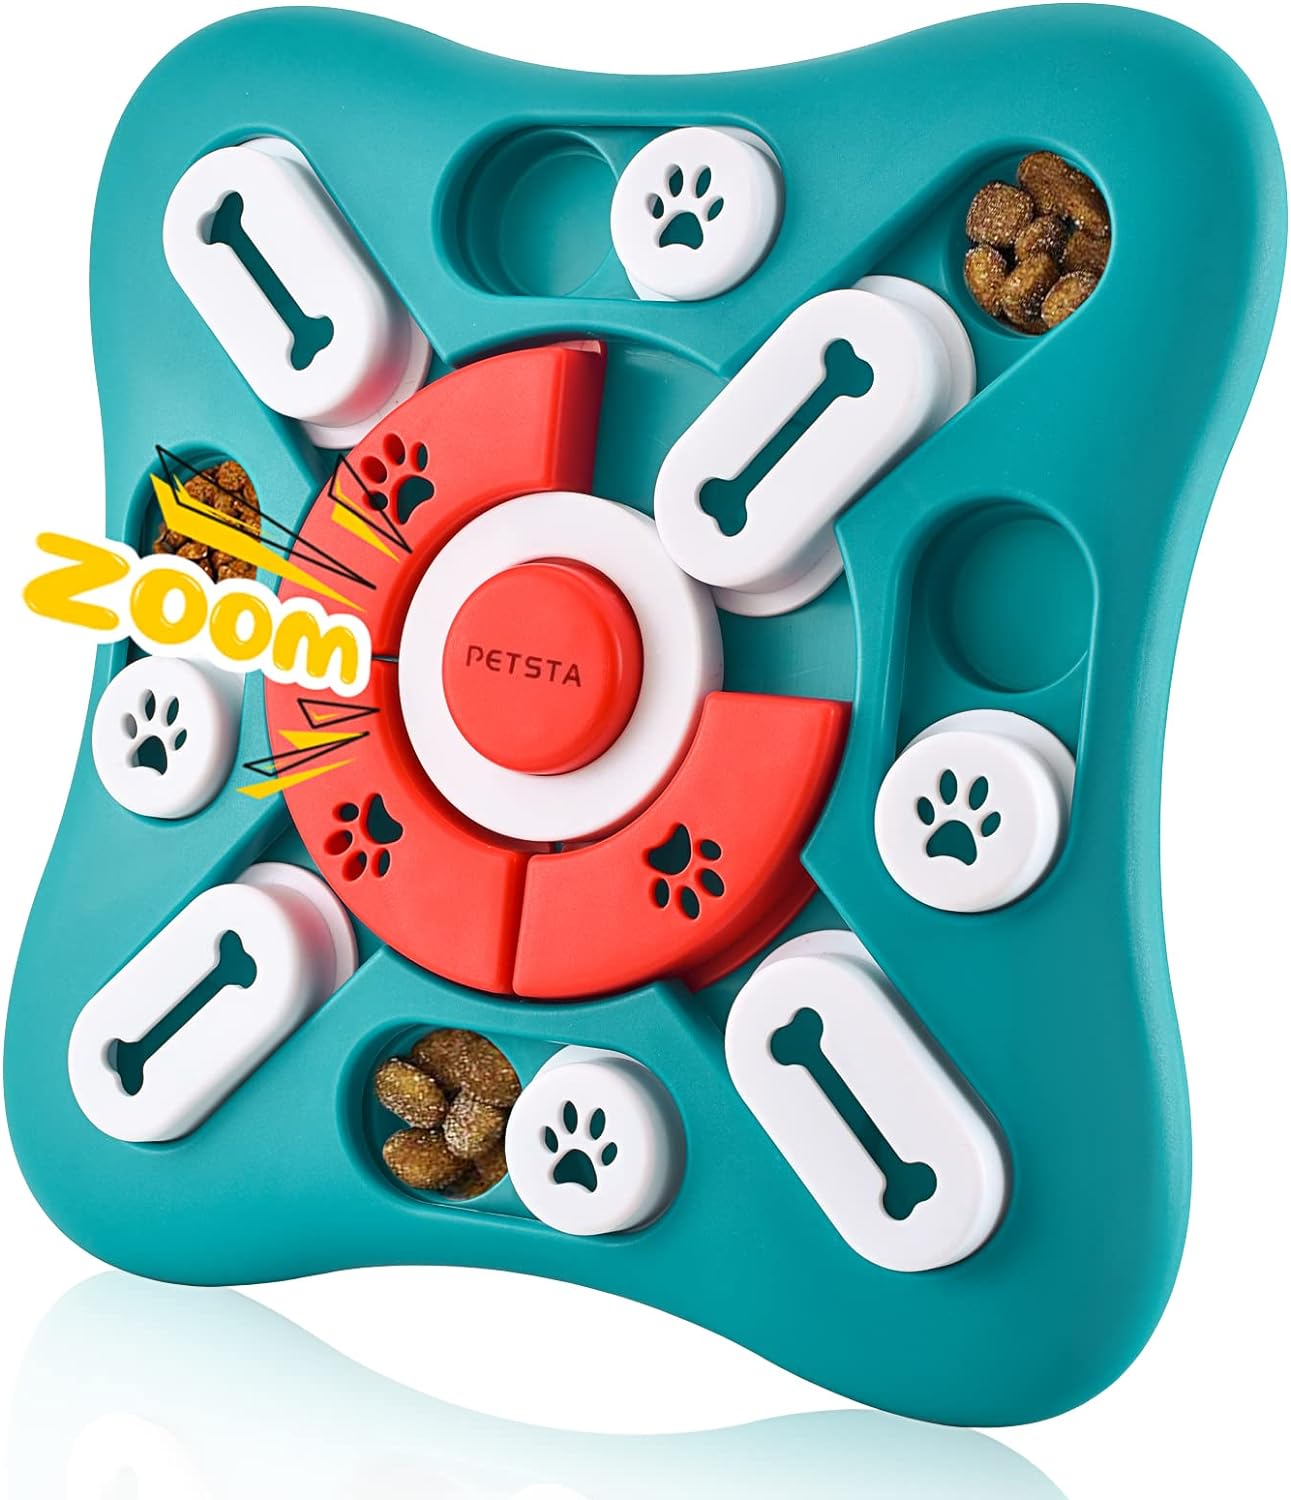 Dog Puzzle Toys, Squeaky Treat Dispensing Dog Enrichment Toys for IQ Training and Brain Stimulation, Interactive Mentally Stimulating Toys as Gifts for Puppies, Cats, Small, Medium, Large Dogs